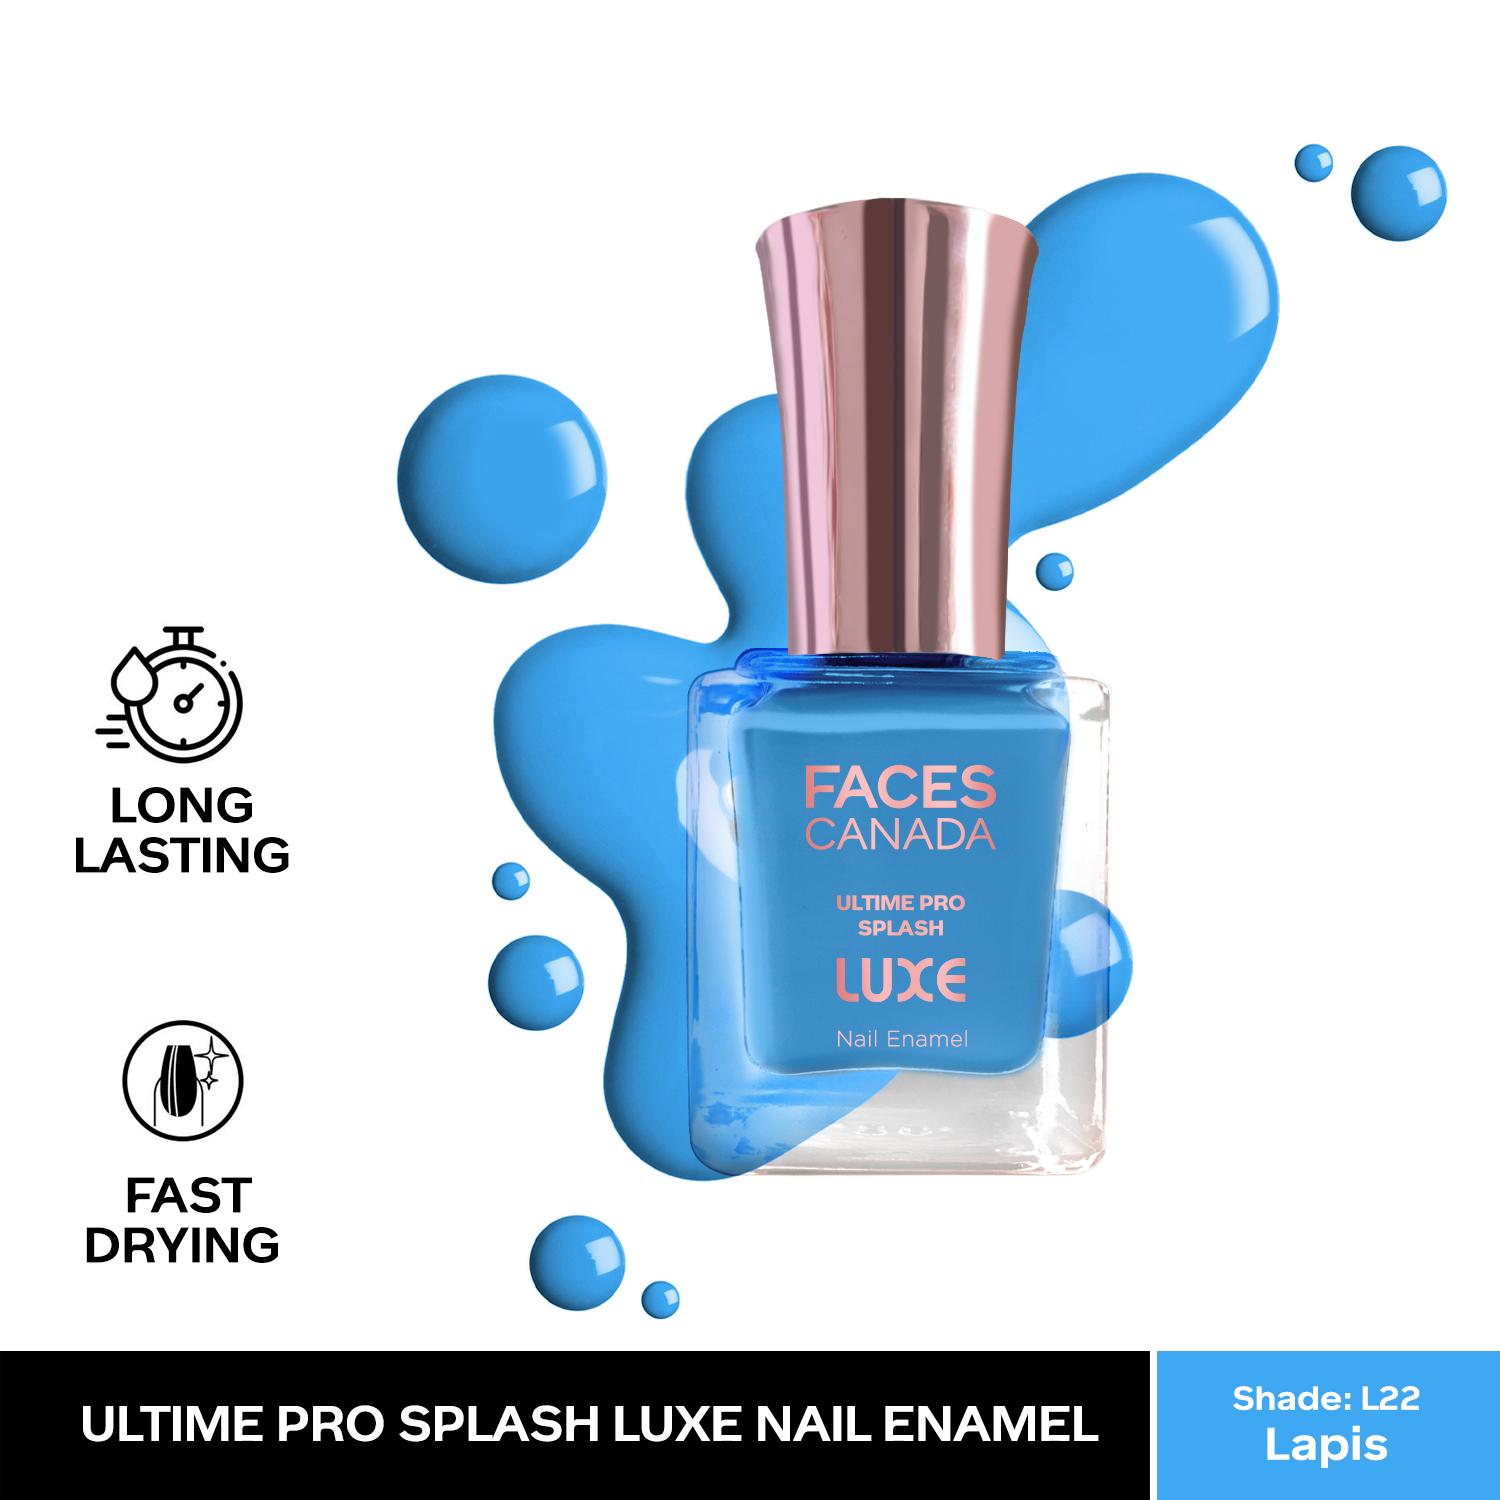 Faces Canada | Faces Canada Ultime Pro Splash Luxe Nail Enamel - Lapis (L22), Glossy Finish, Quick Drying (12 ml)